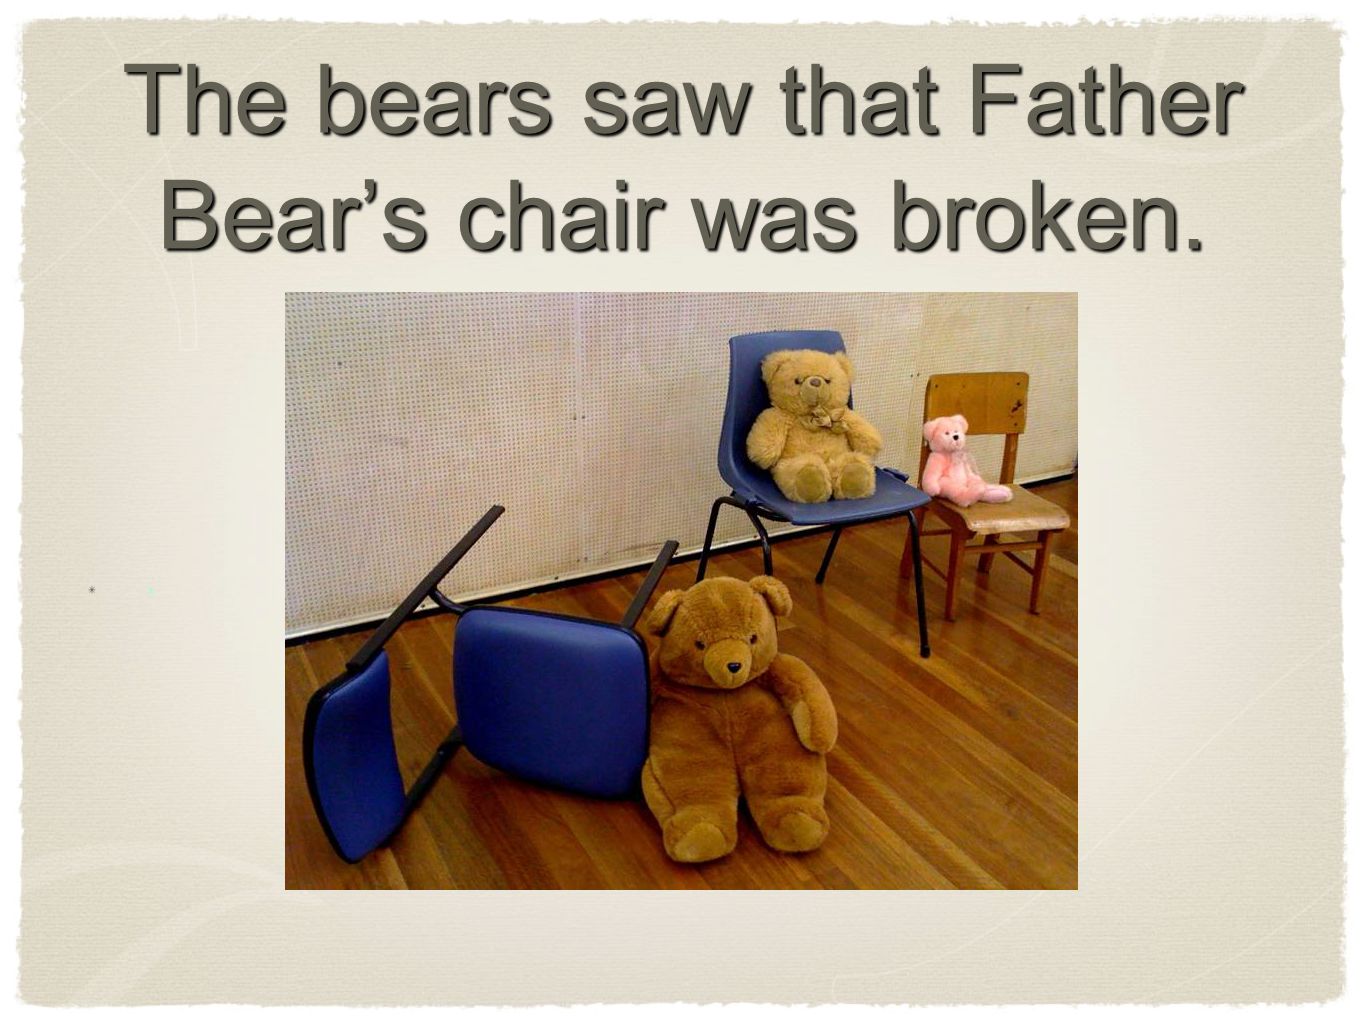 The bears saw that Father Bear’s chair was broken. x